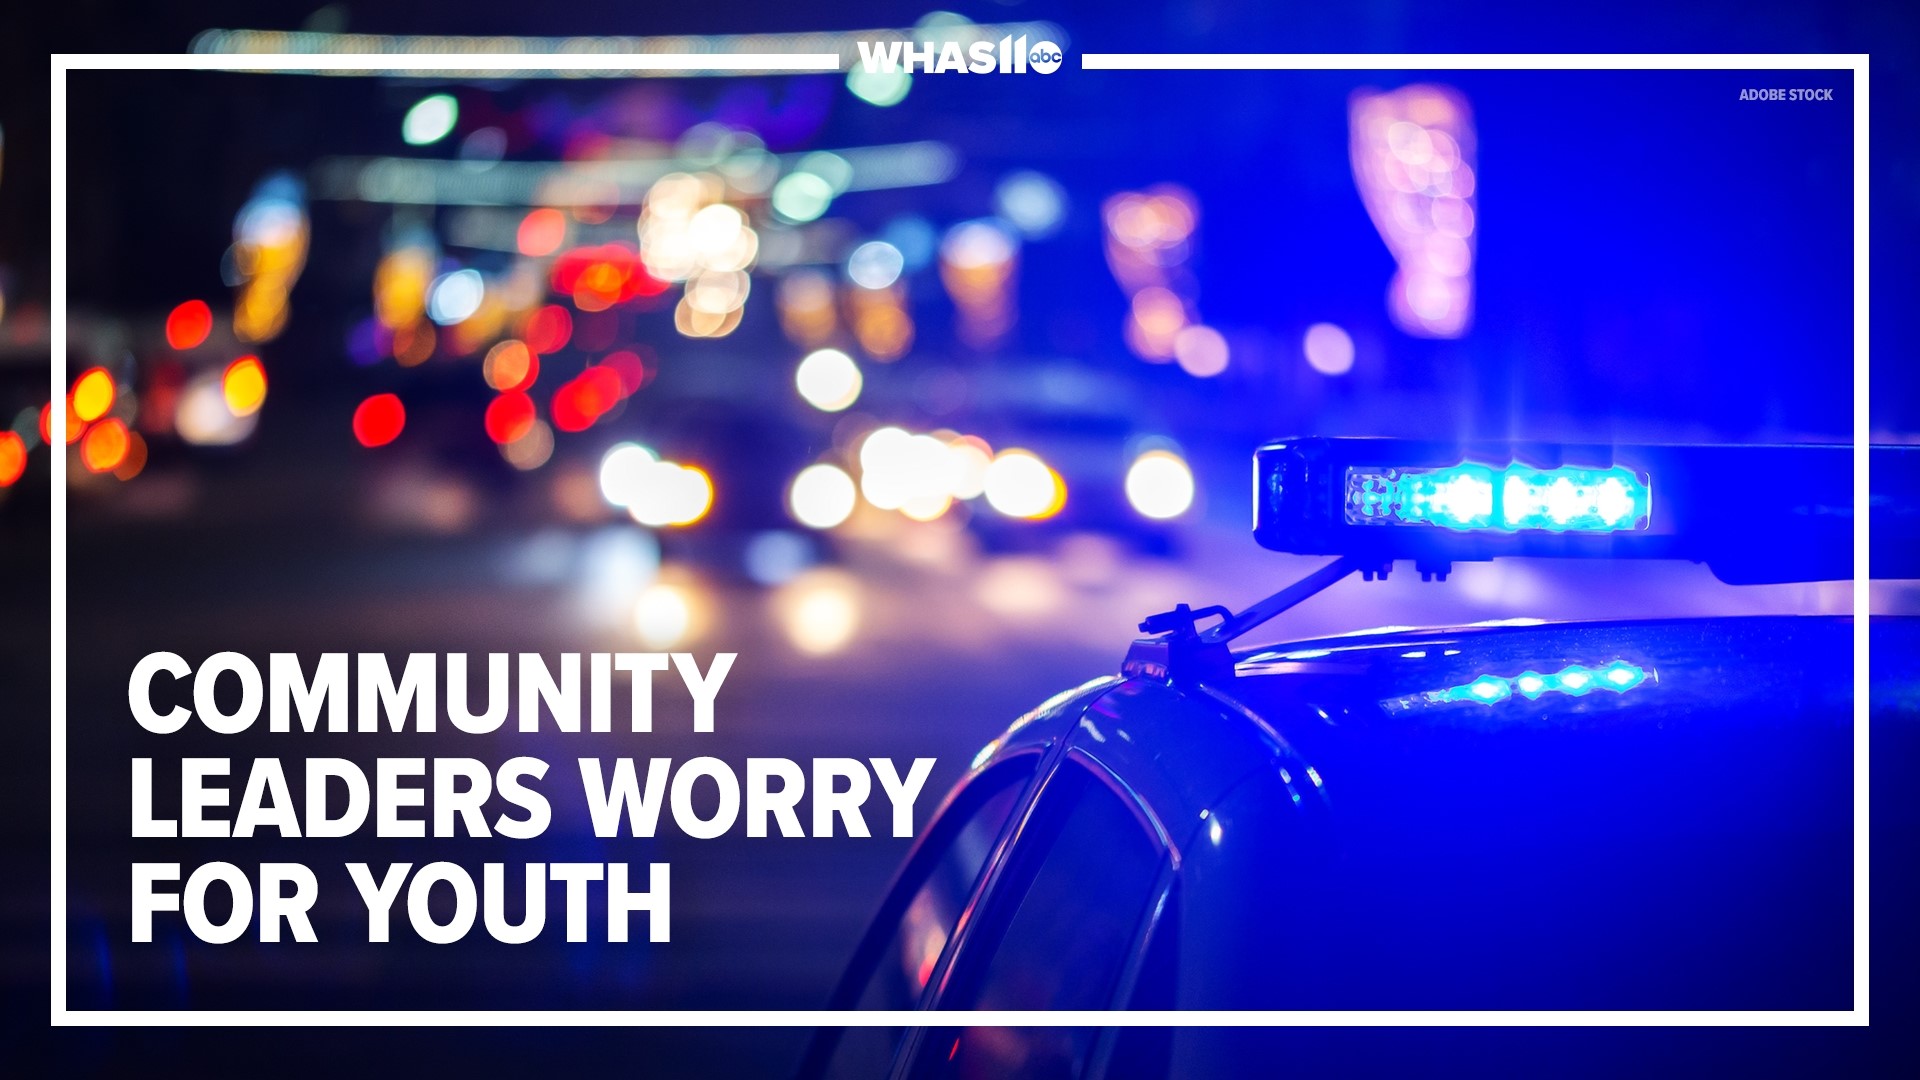 Just within the past few weeks, there have been several senseless acts of violence. And with school letting out for the summer, community leaders fear for youth.